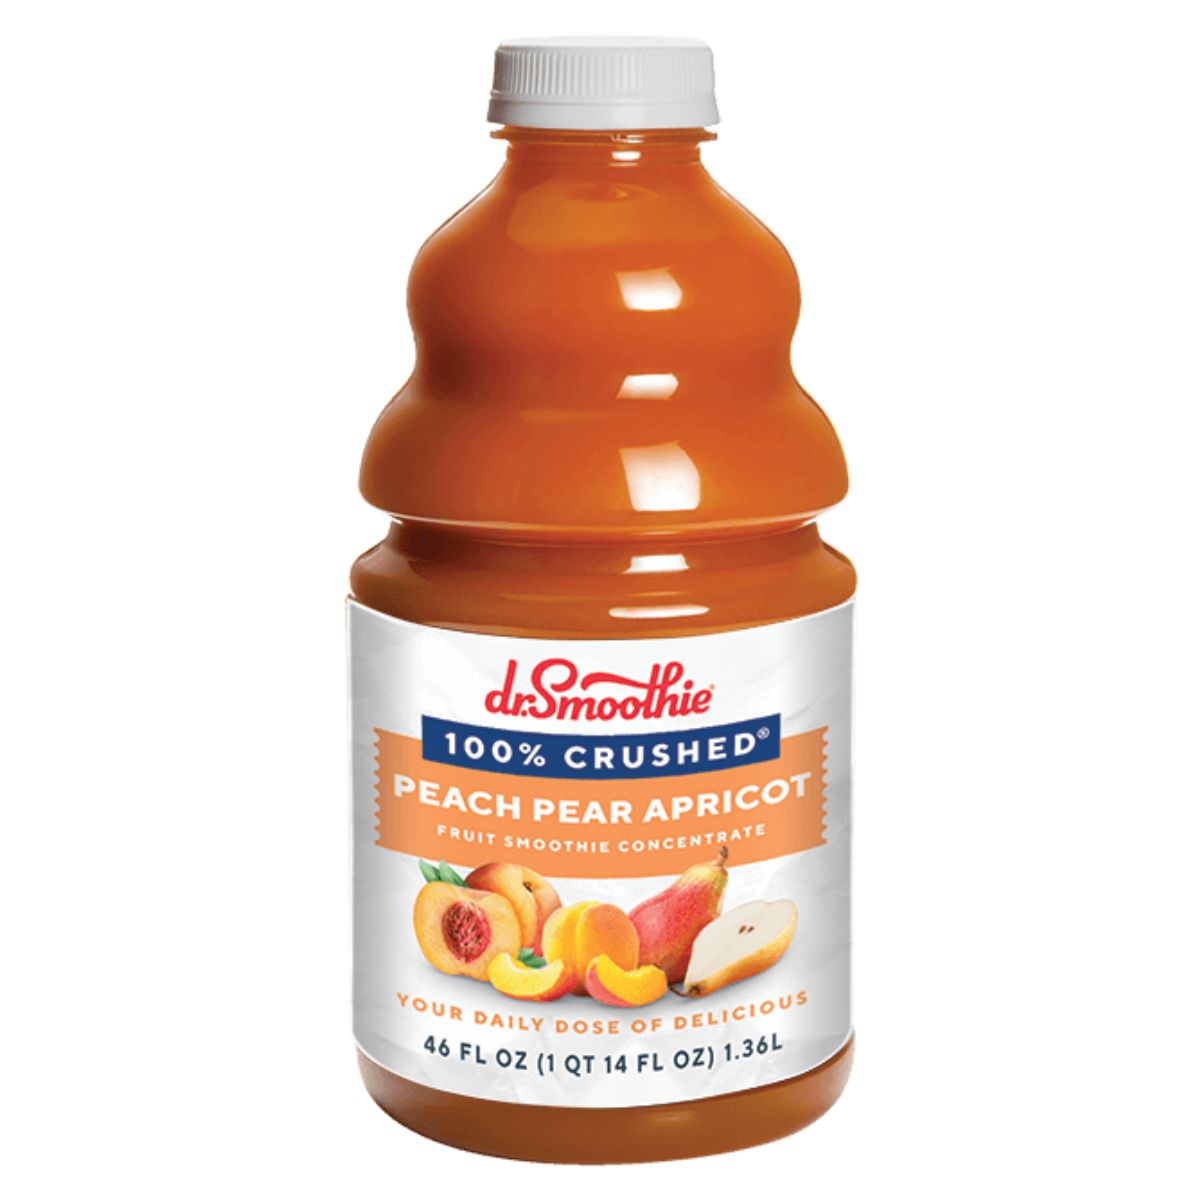 Dr. Smoothie 100% Crushed Peach Pear Apricot